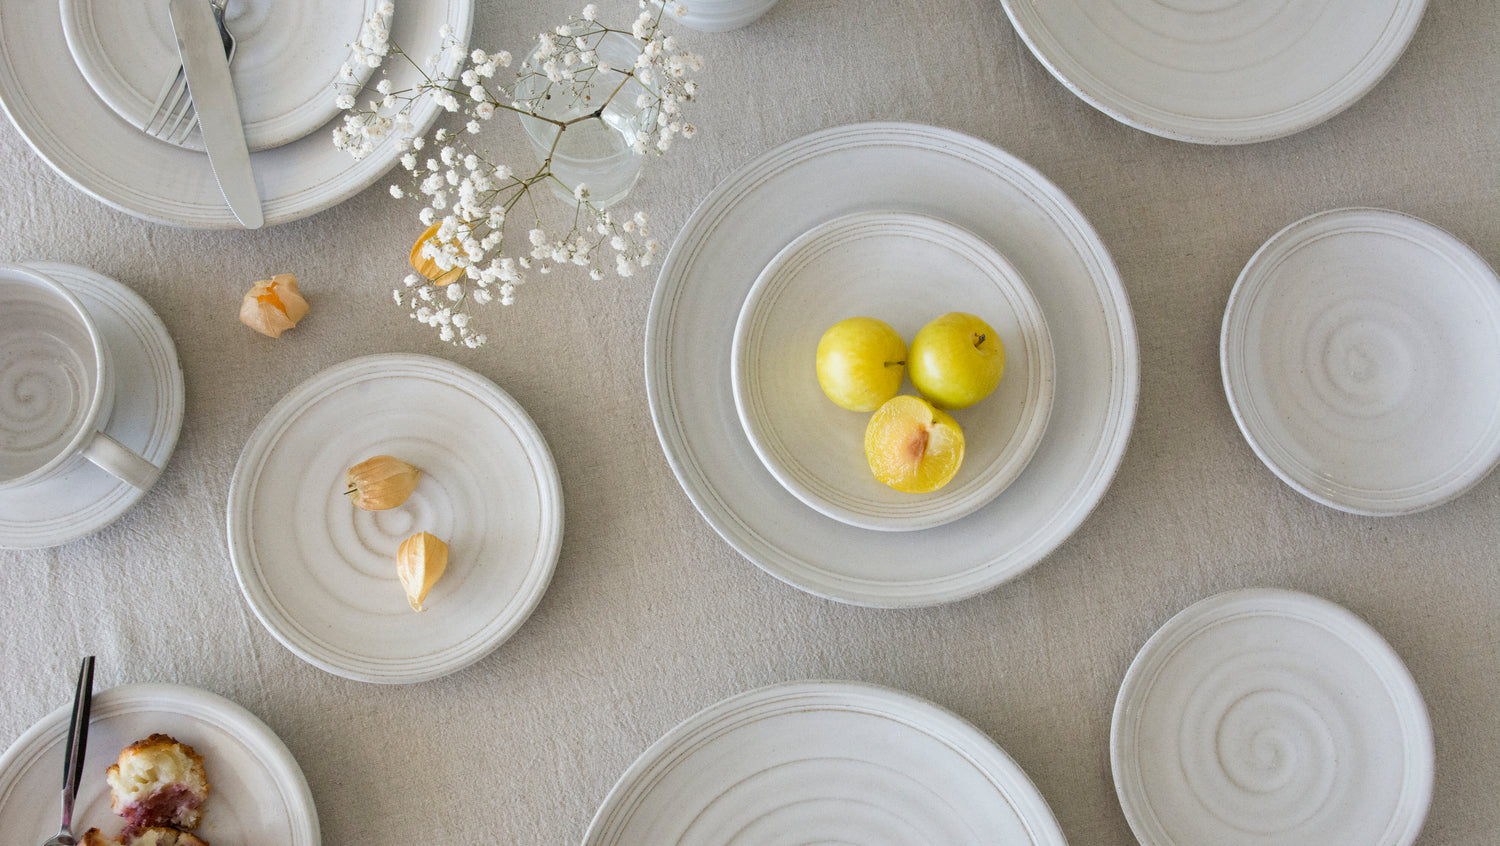 Rustic white pottery dinnerware - harves collection